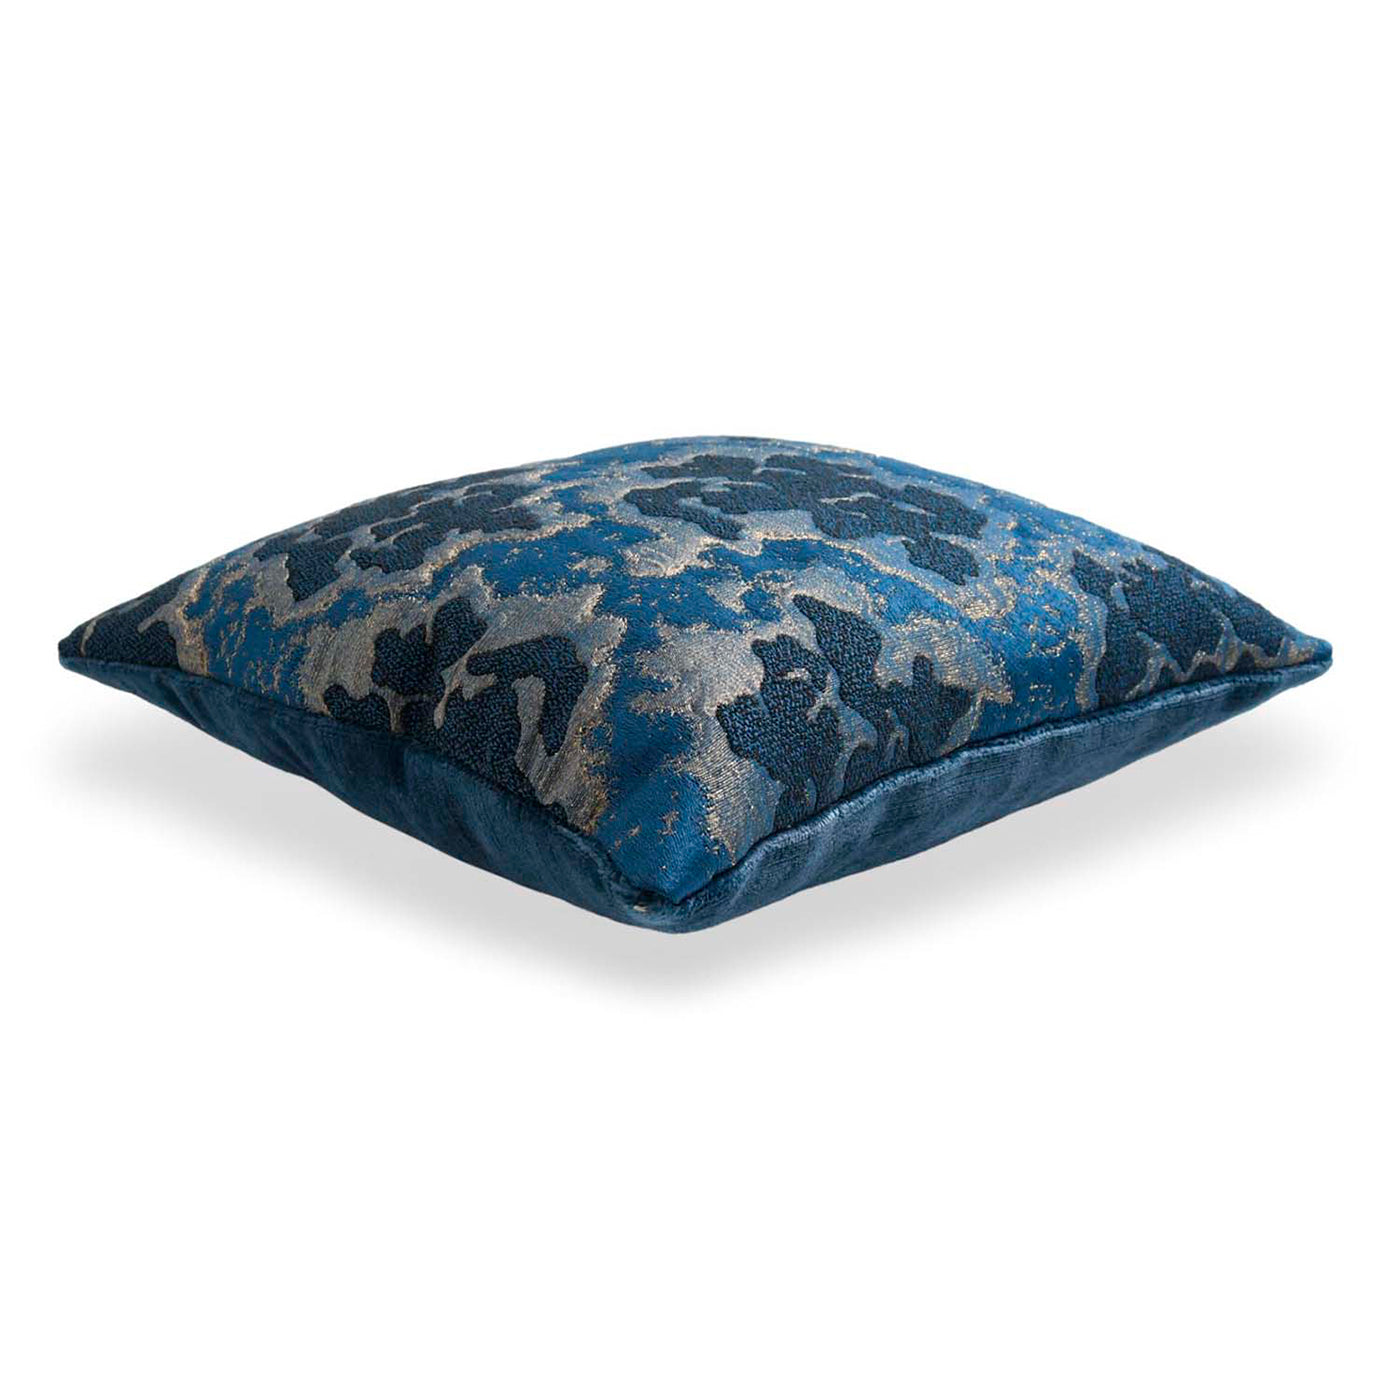 Decorative Blue and Gold Square Cushion - Alternative view 2